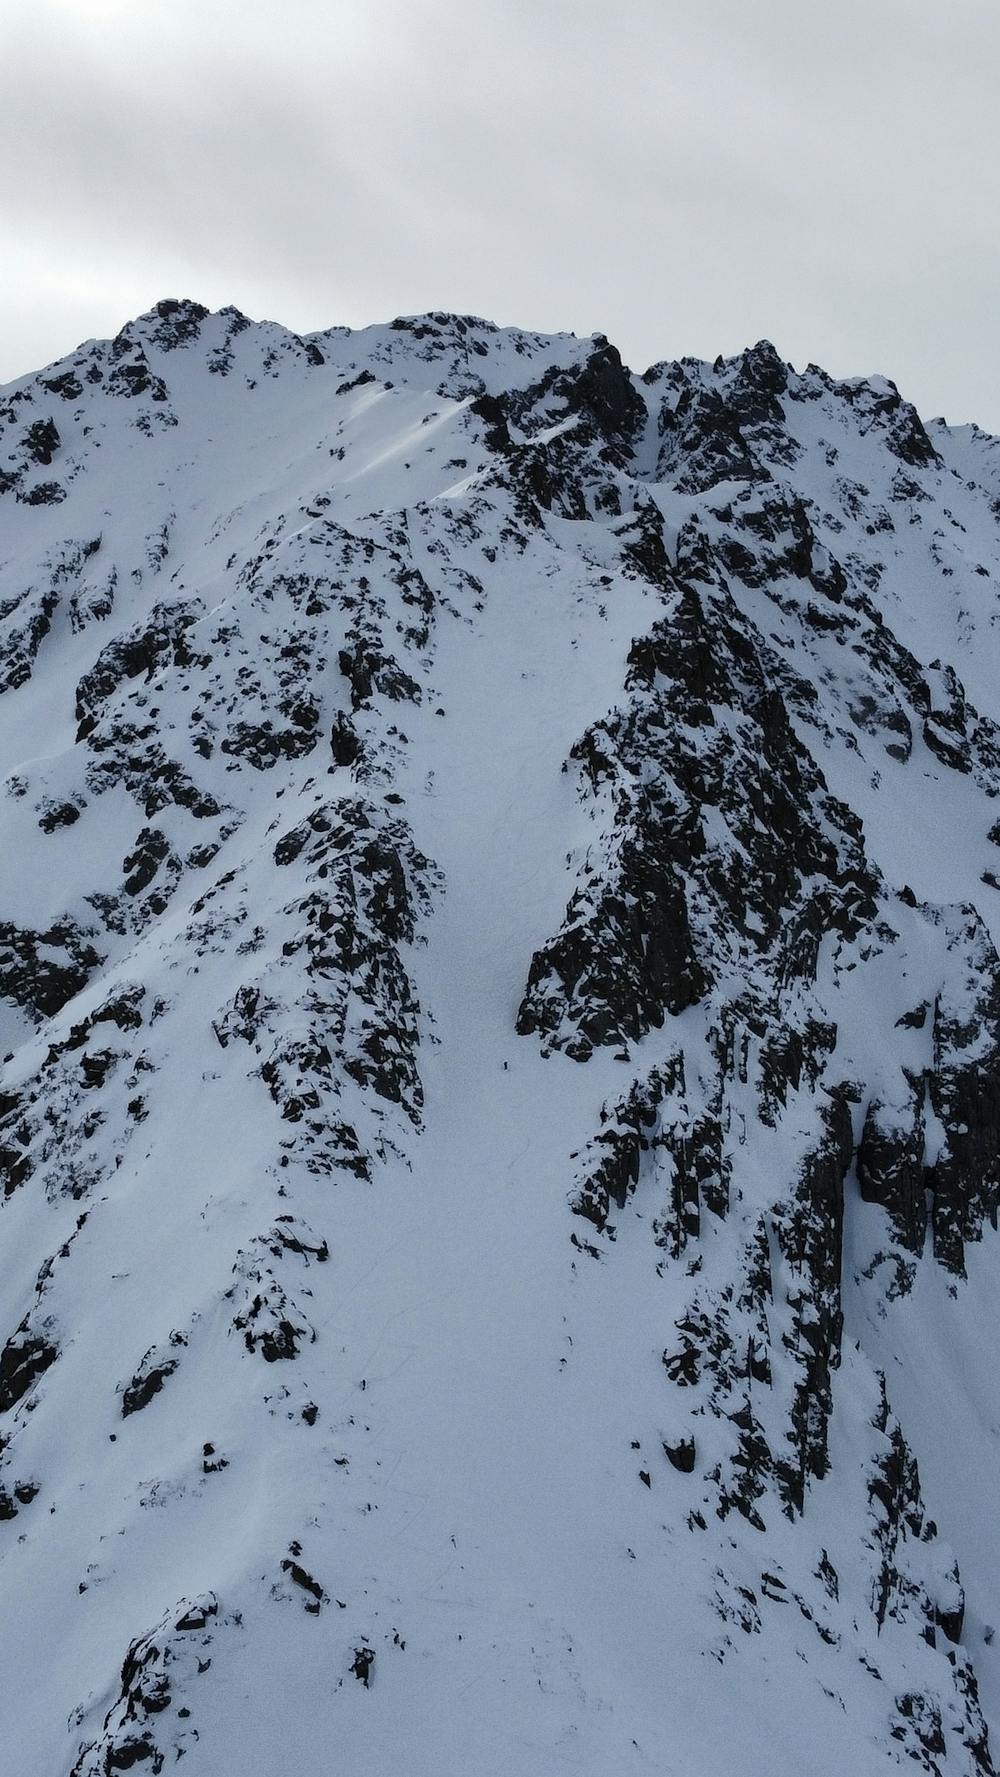 A drone view of the couloir